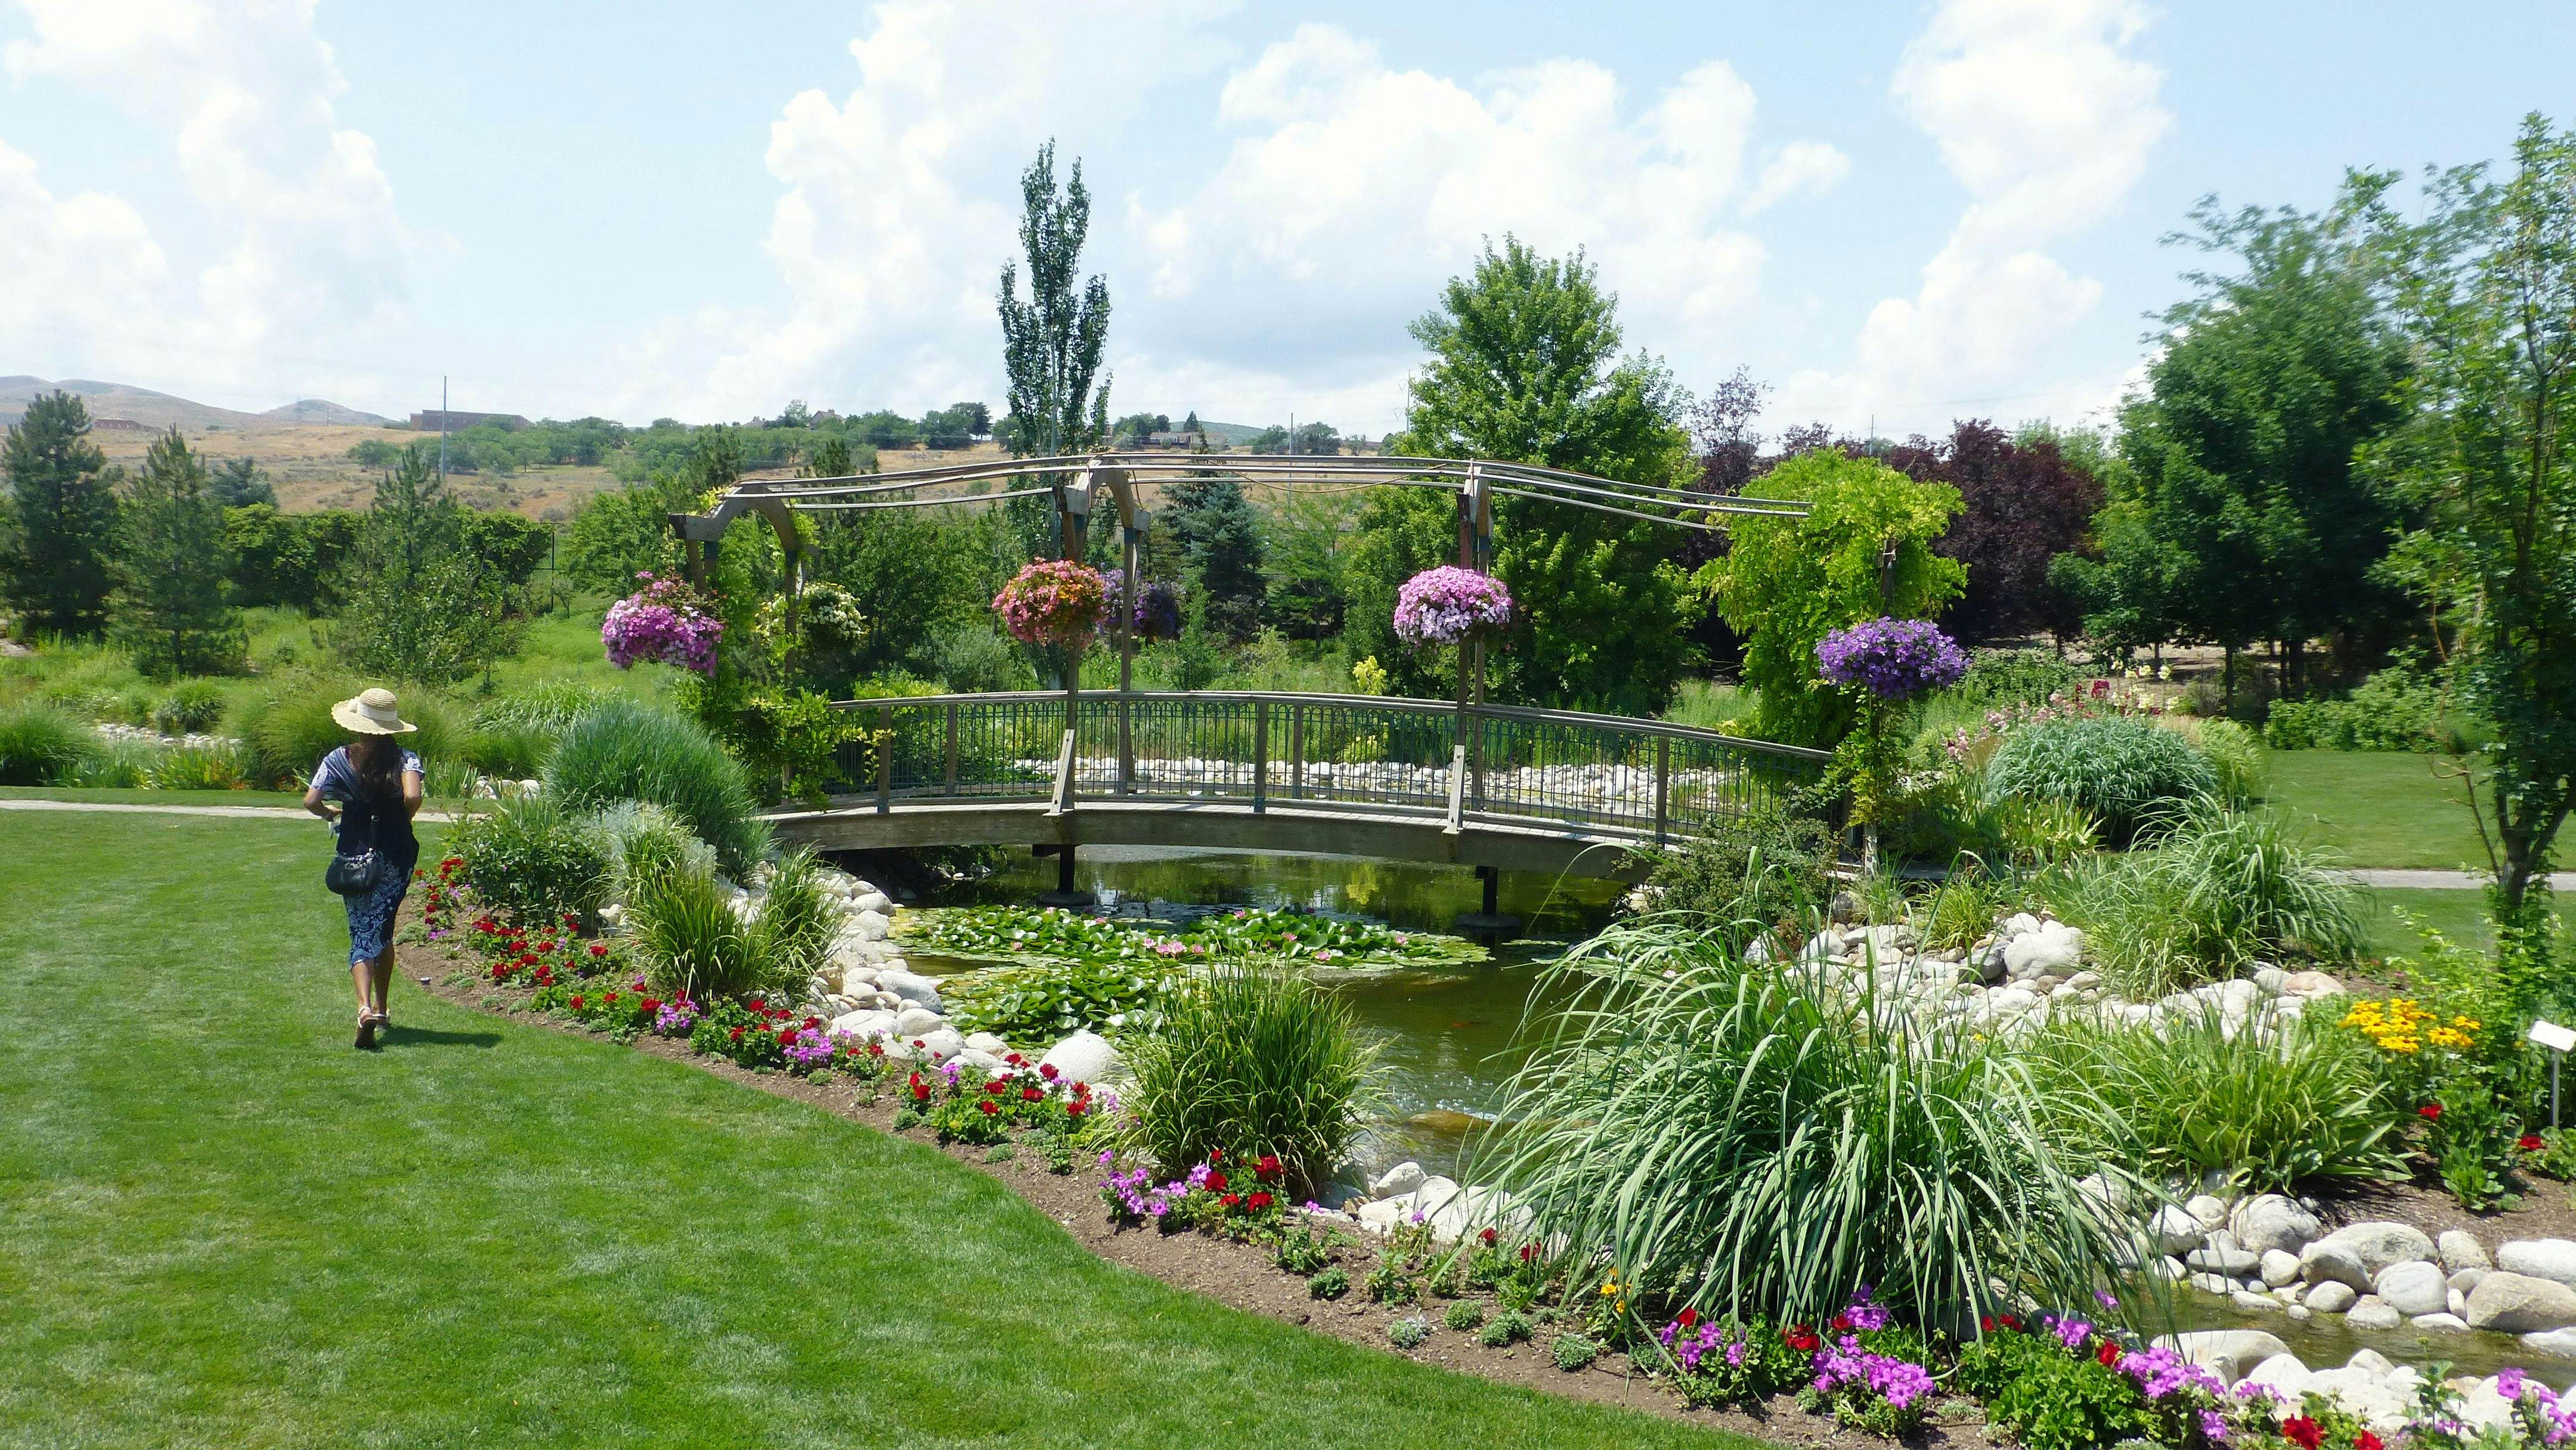 Best Gardens in Salt Lake City - Self-Guided Day Trip